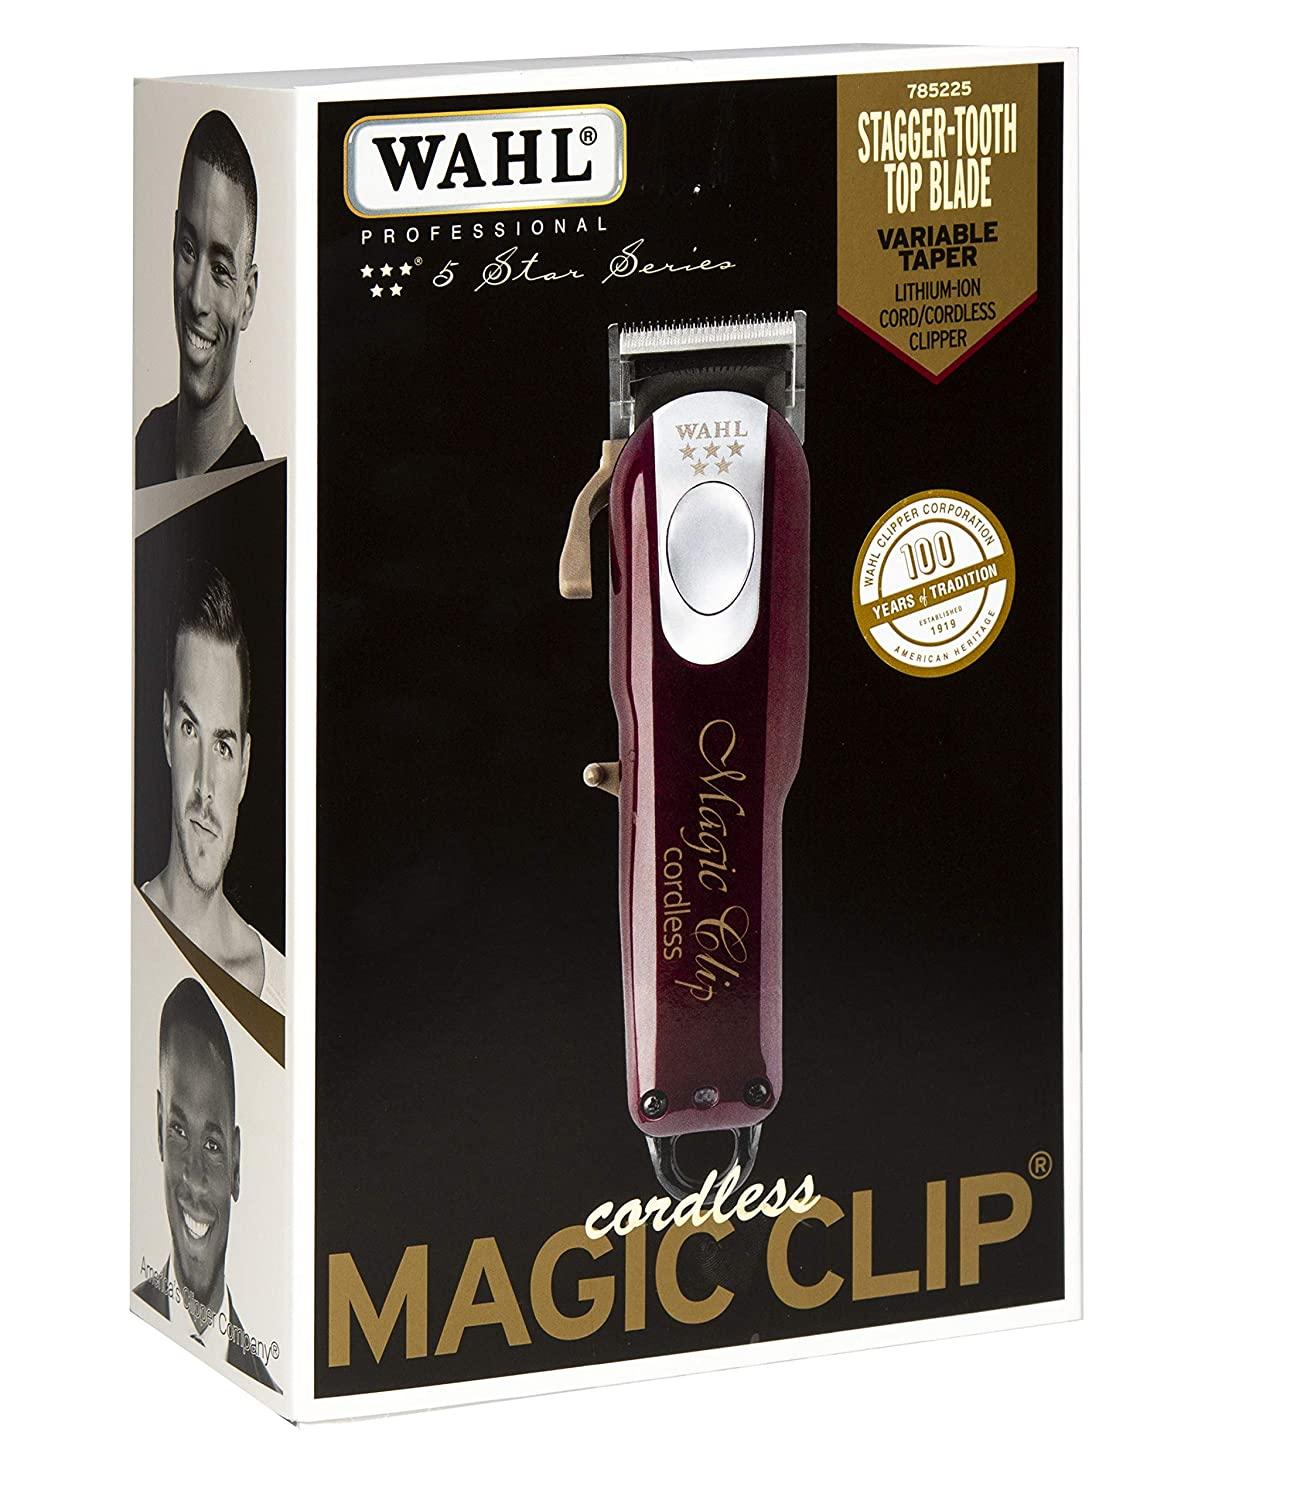 Wahl Professional 5 Star Cordless Magic Clip Hair Clipper with 100 Run Time Professional Barbers Stylists